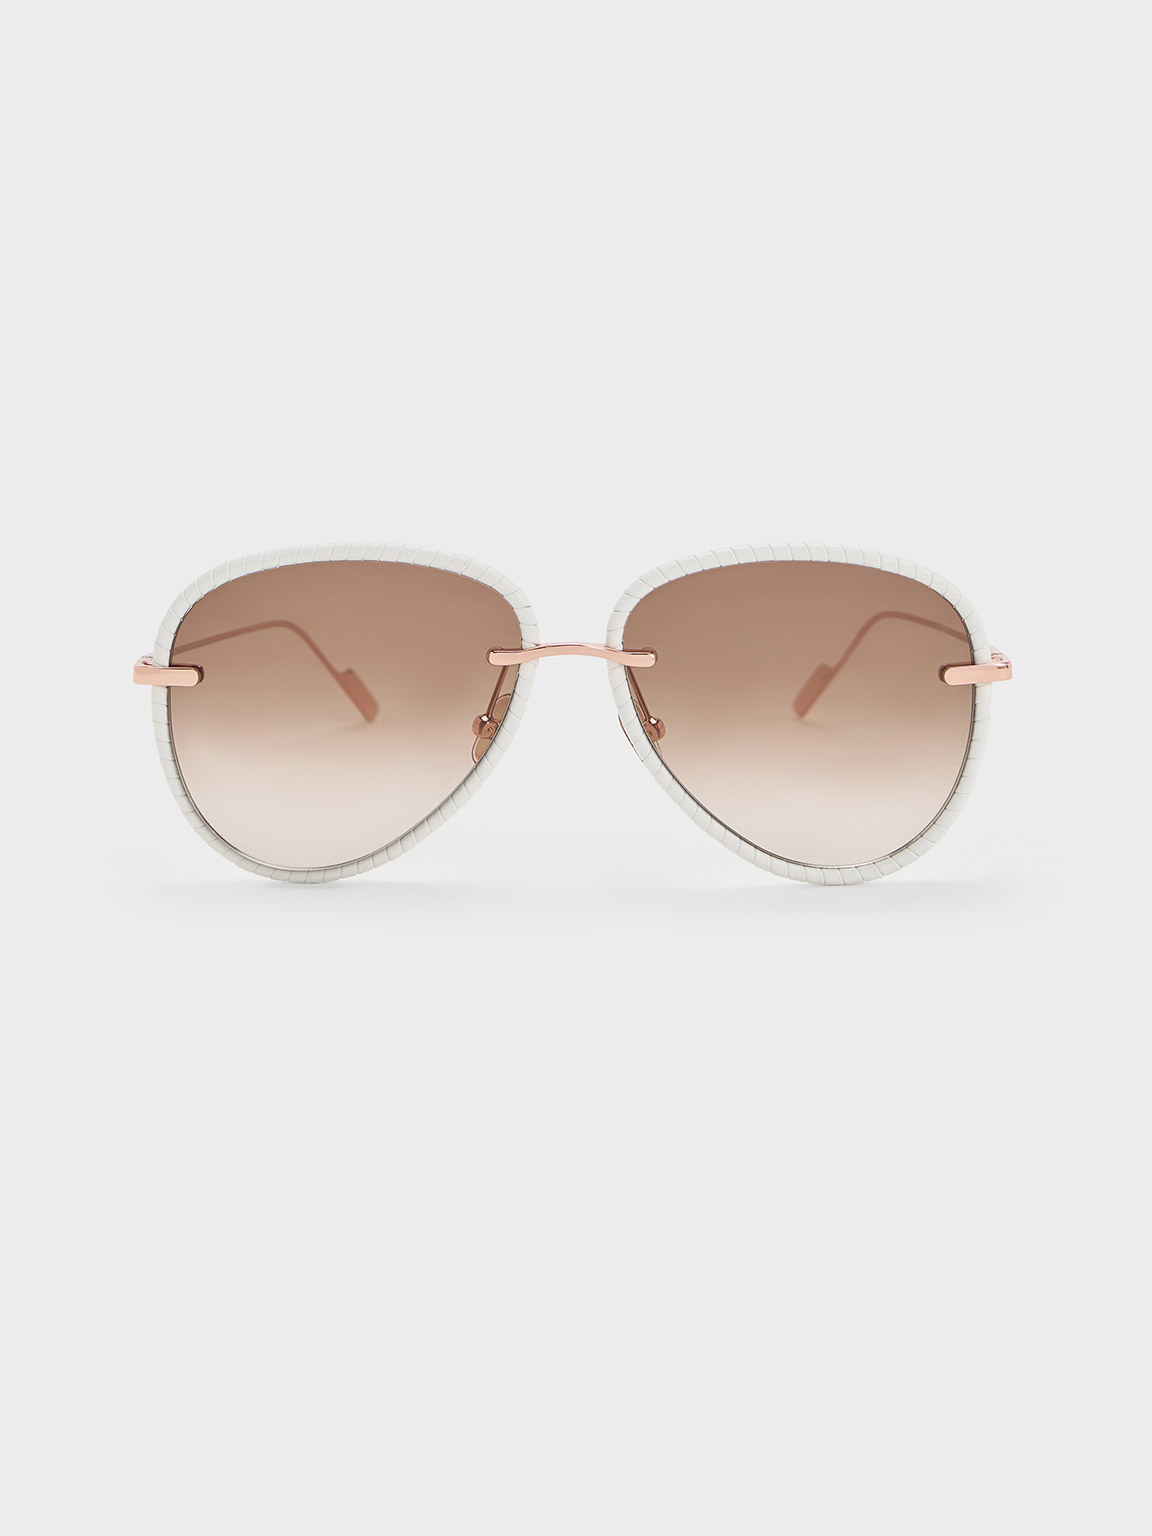 Charles & Keith Leather Braided-rim Aviator Sunglasses In Brown